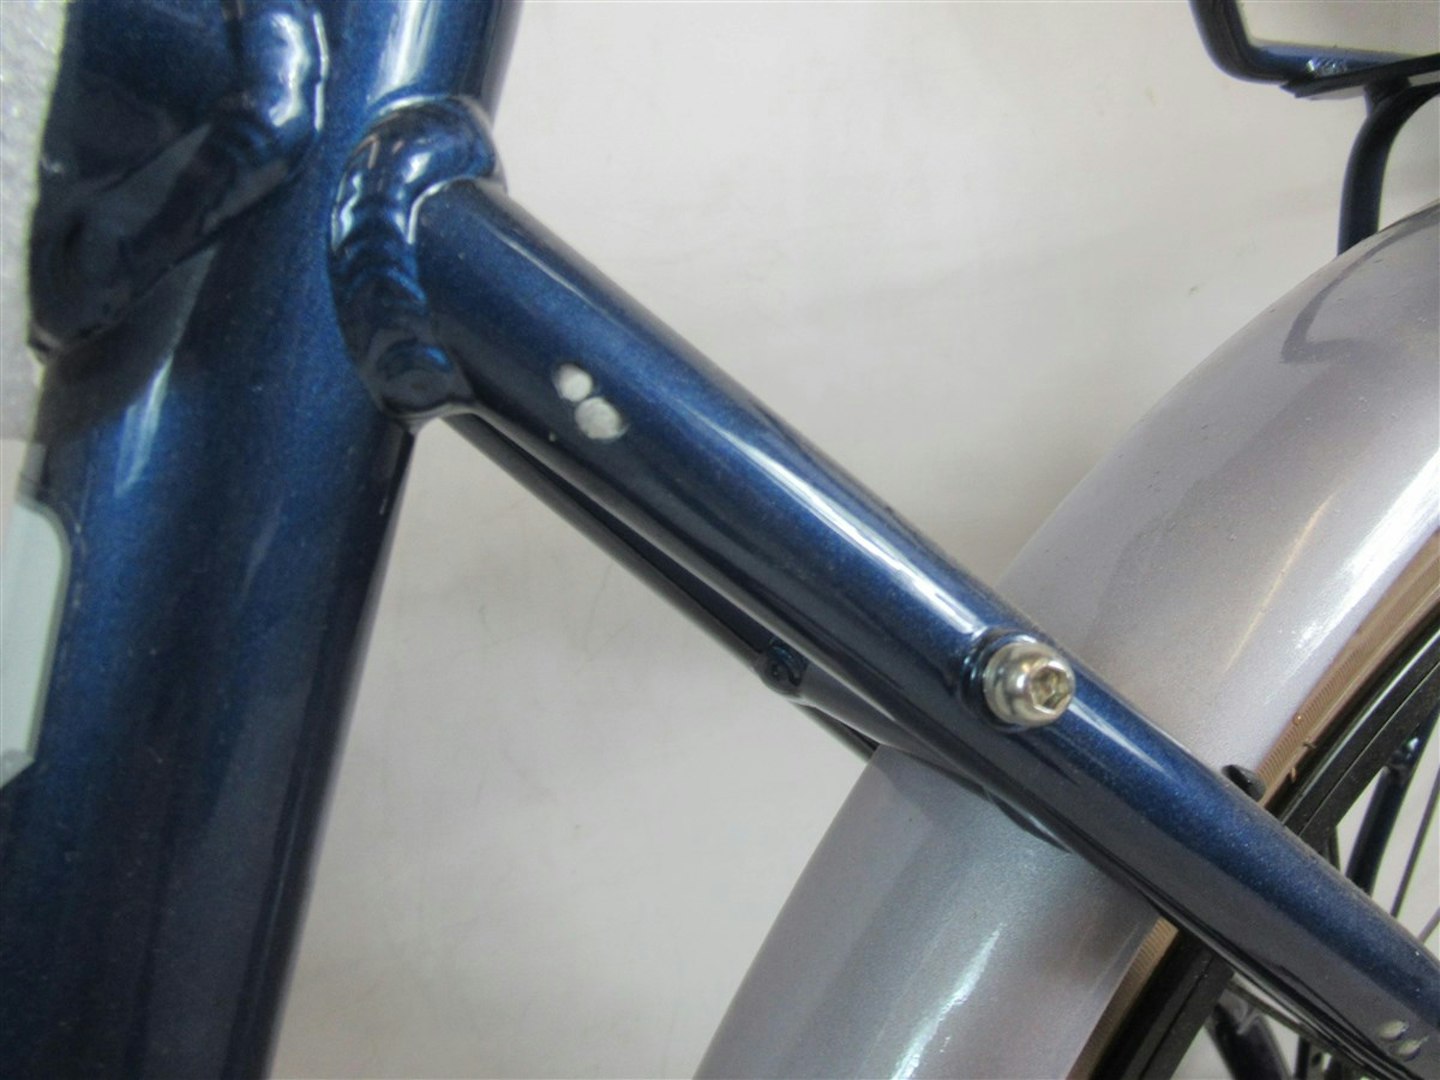 Raleigh Array Crossbar seat stay paint damage